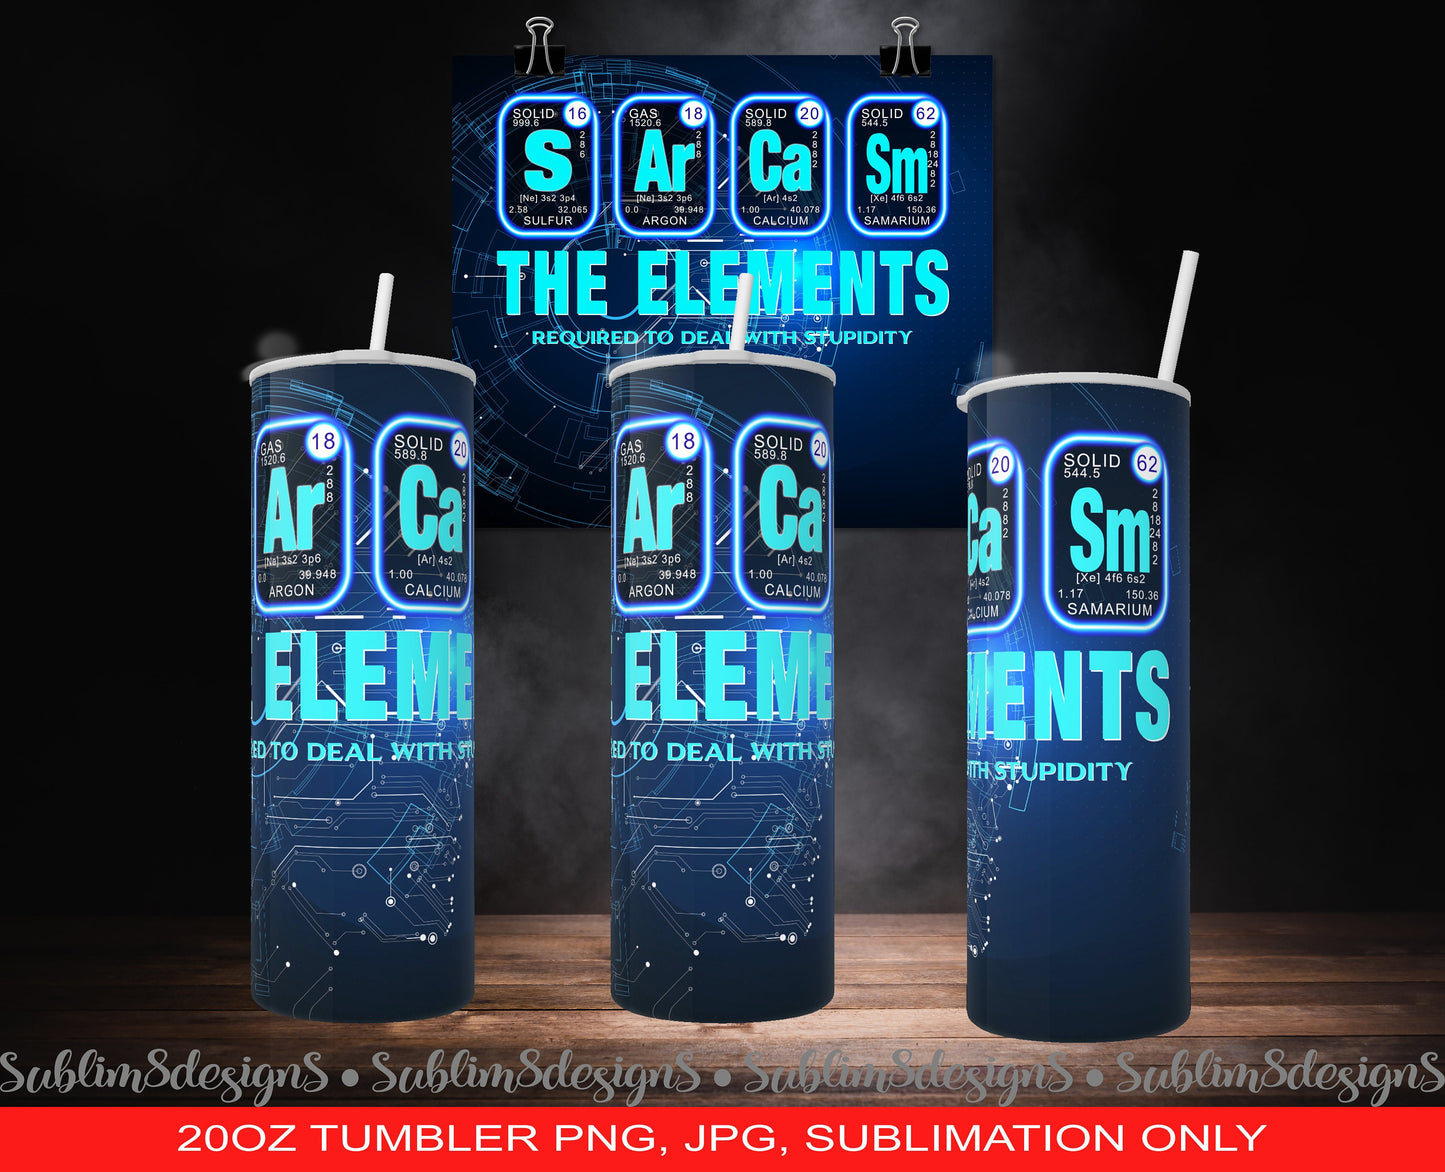 Sarcasm The Elements Required To Deal With Stupidity 20oz Tumbler PNG and JPG ONLY